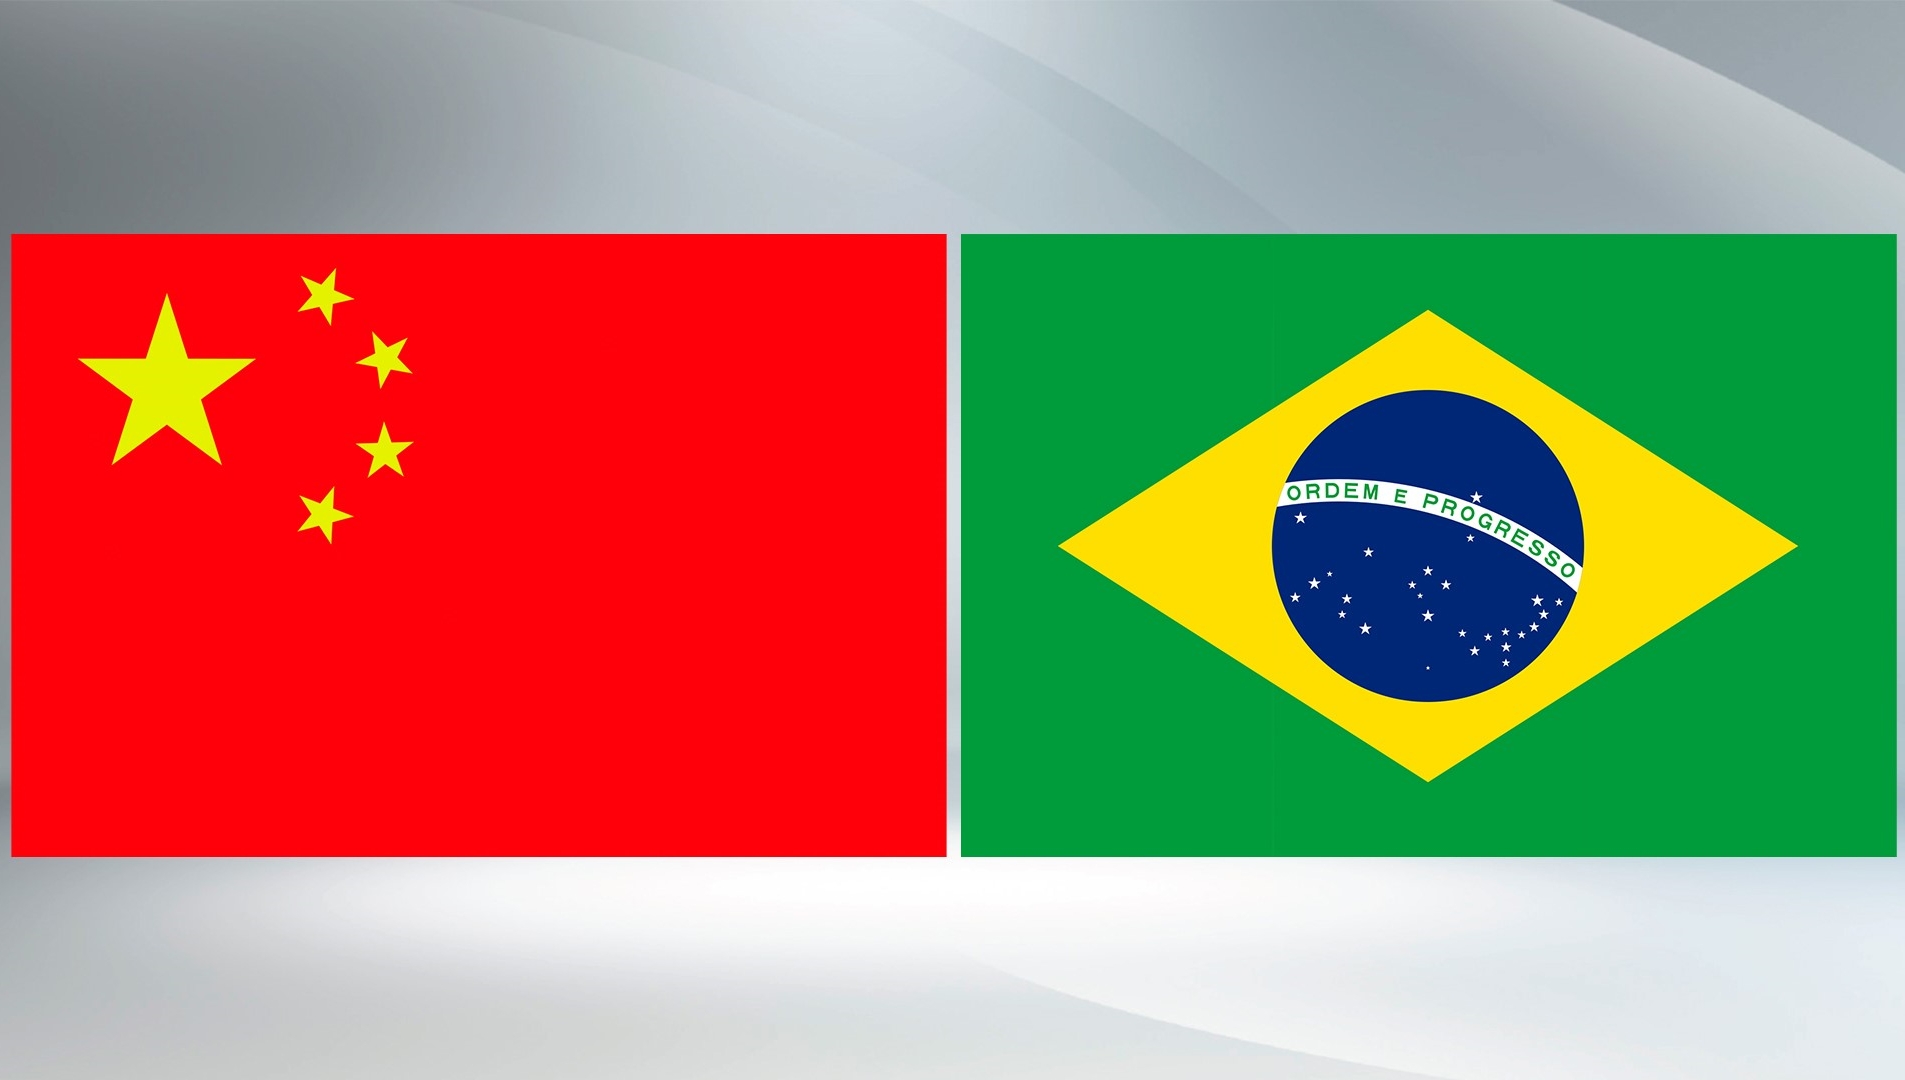 Xi, Lula send congratulatory letters to seminar involving CPC, Workers' Party of Brazil